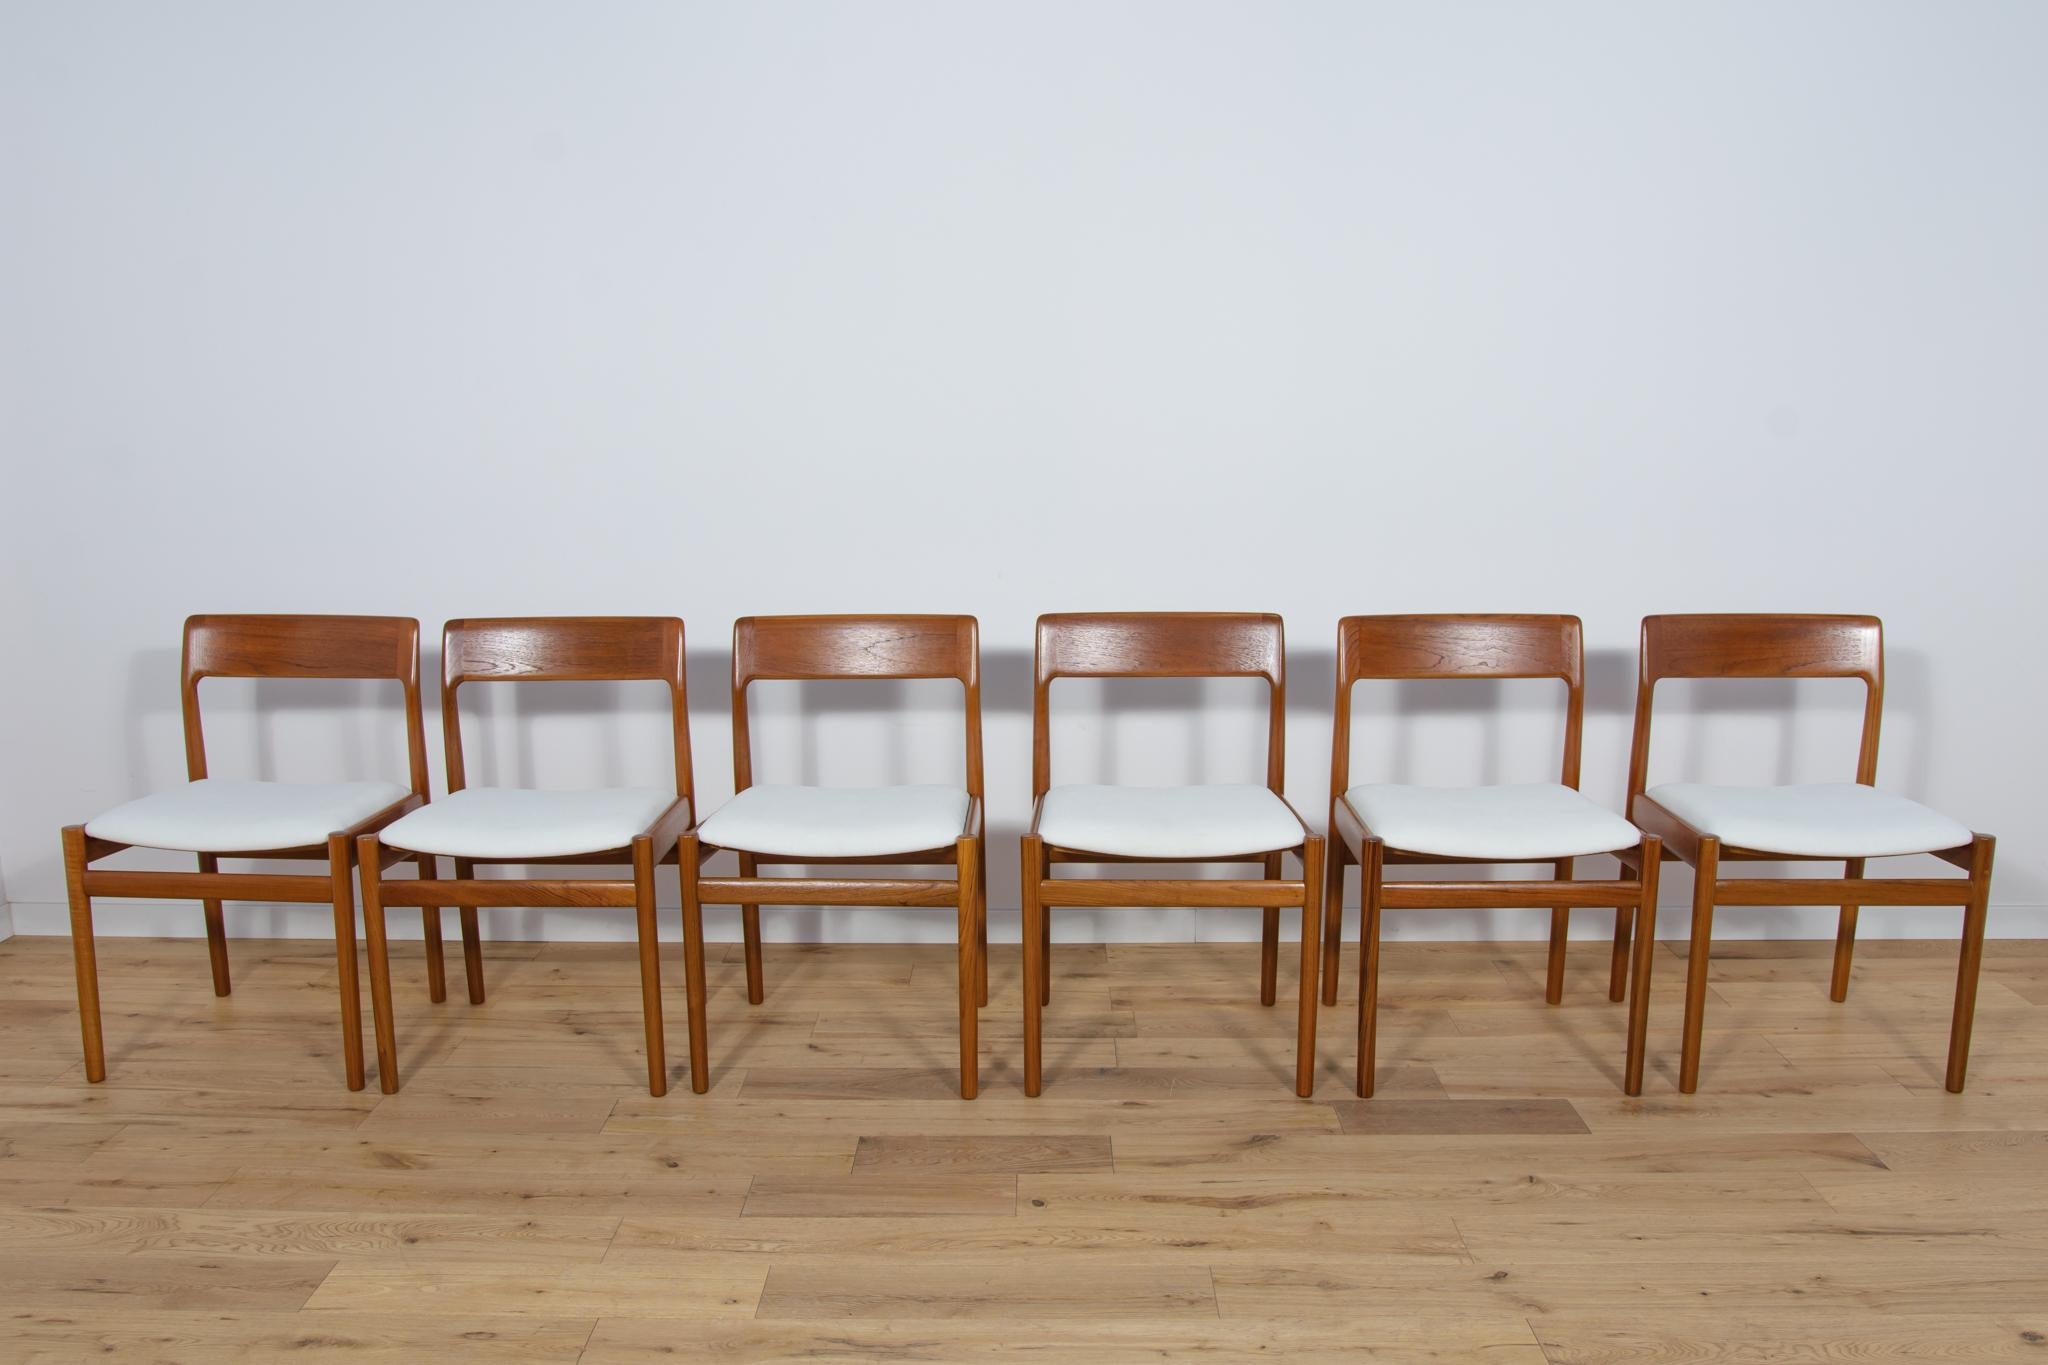 
A set of six teak dining chairs by Johannes Nørgaard for Nørgaards Møbelfabrik from the 1960s. Very elegant, modern mid-century teak chairs with a contoured shape. High-quality materials and woodwork. The teak elements have been cleaned from the